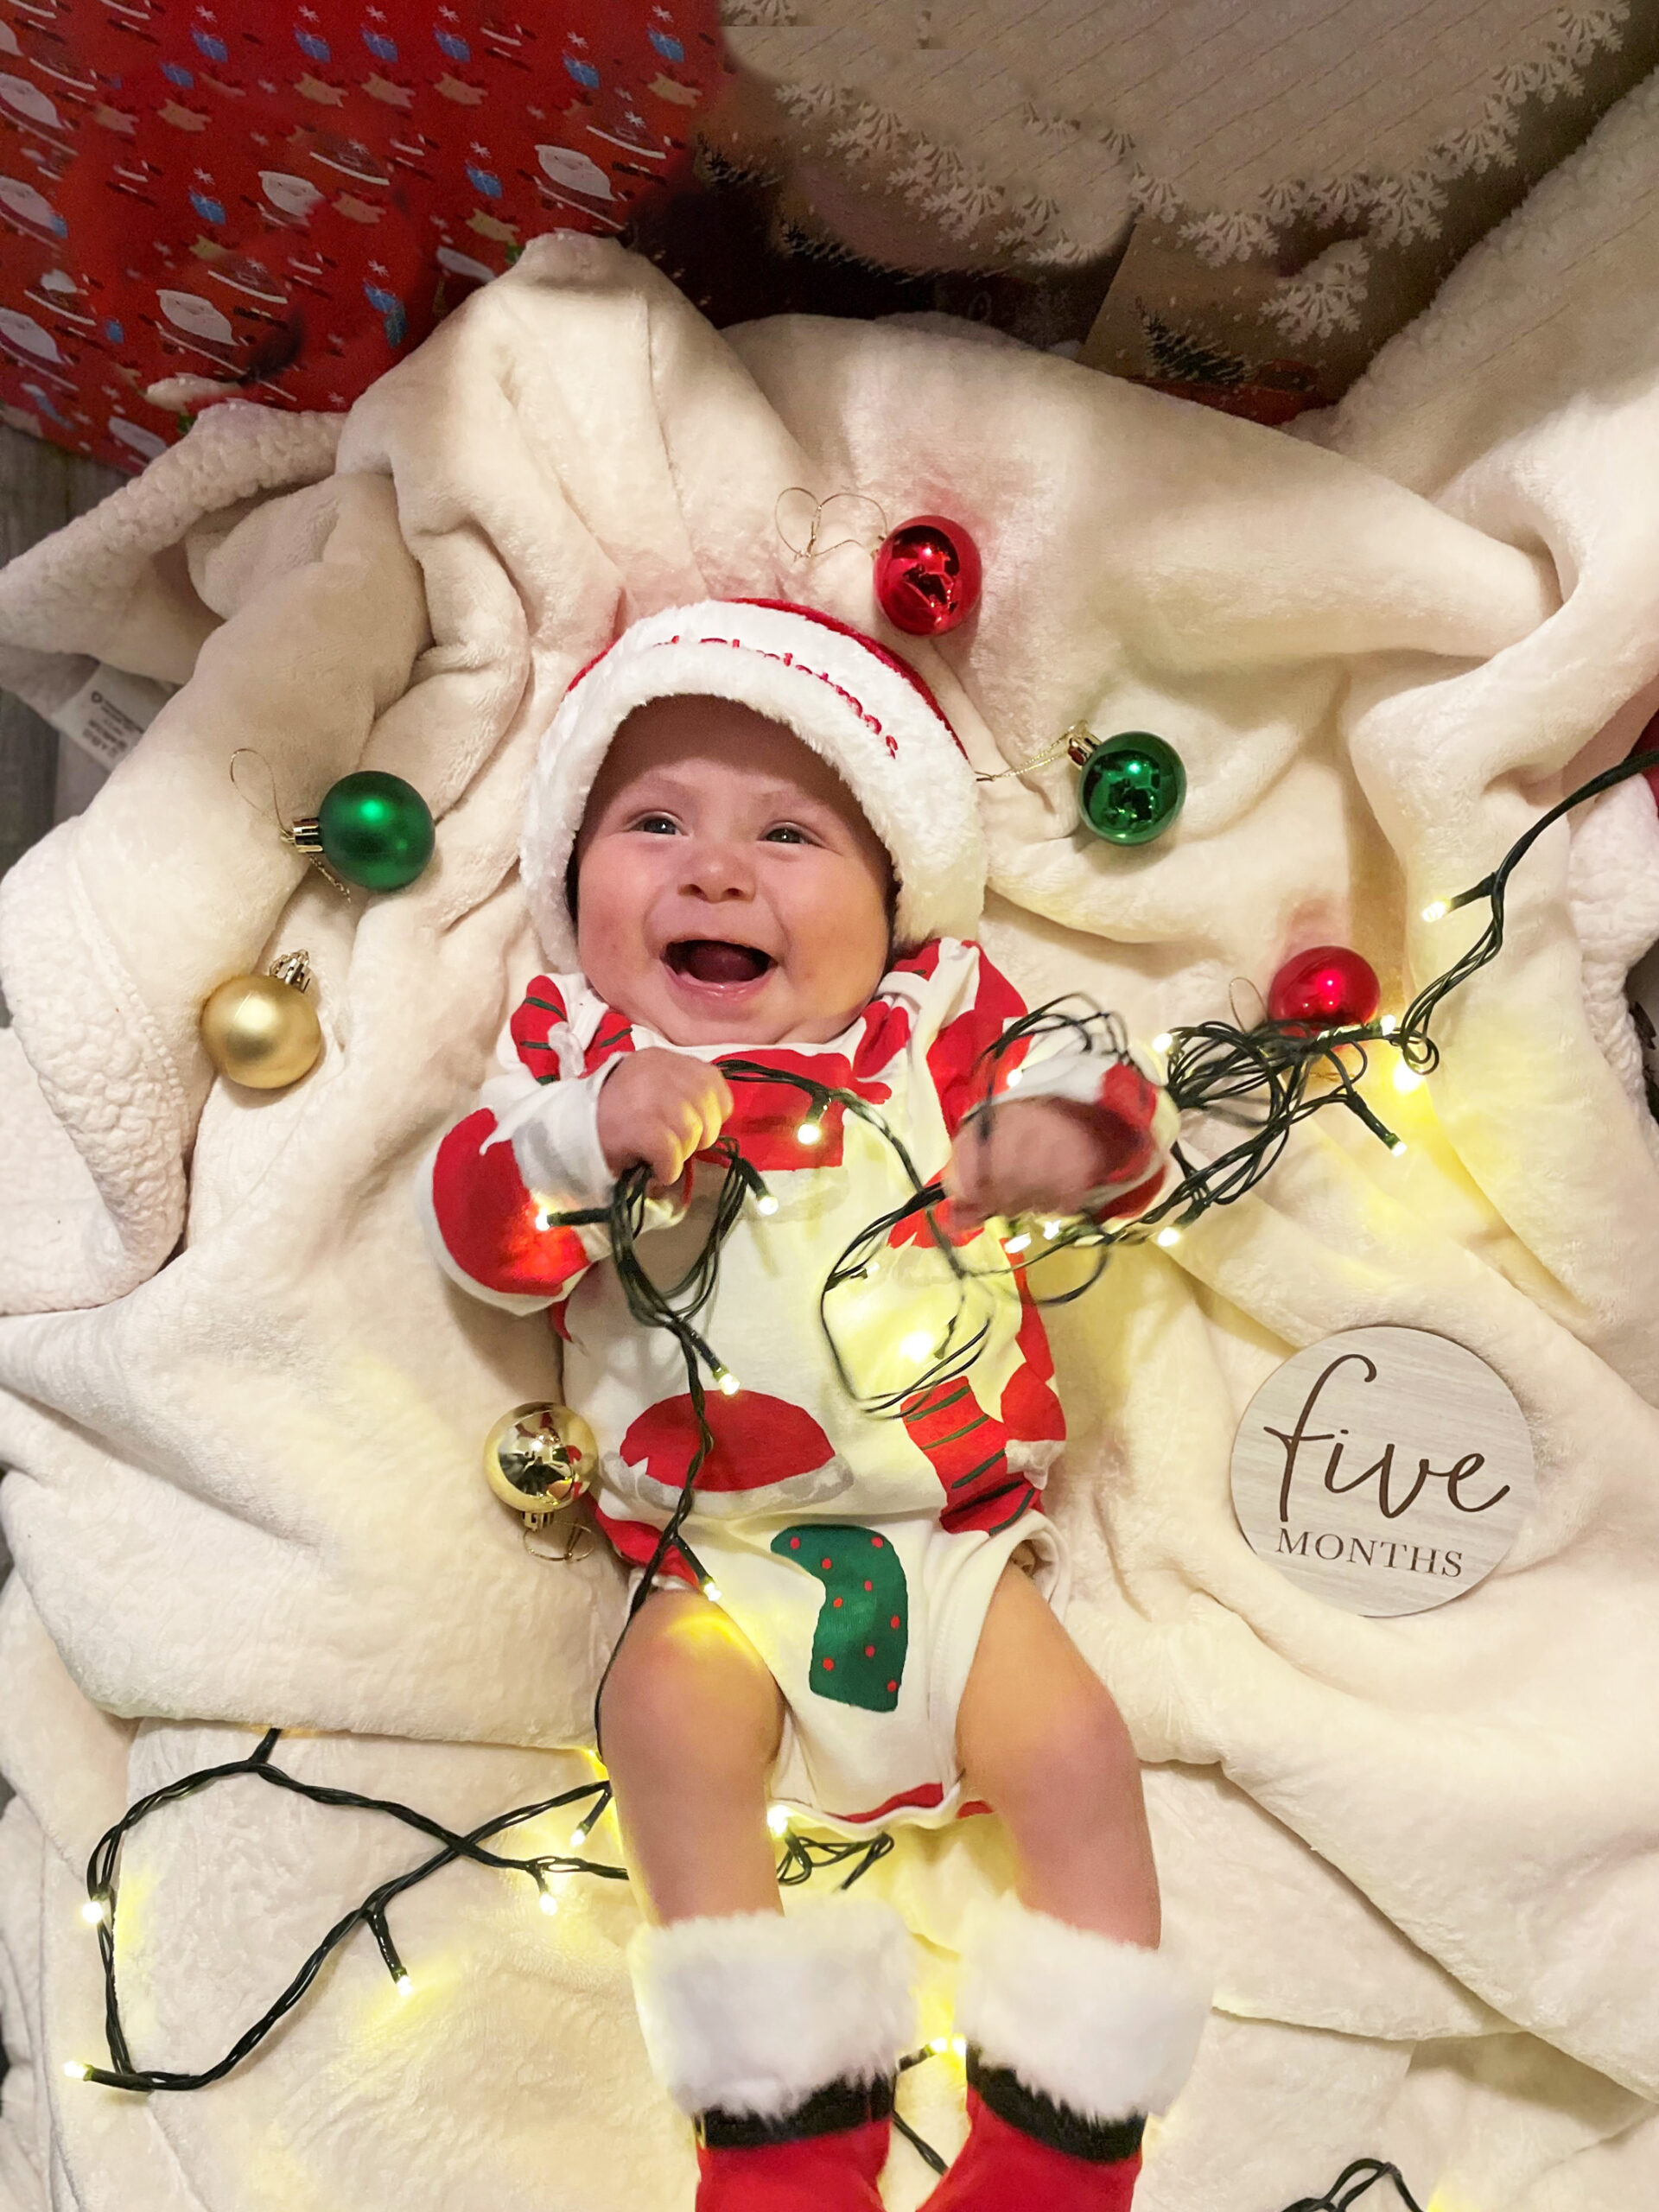 Damian smiling with lights and ornaments, celebrating 5 months of age